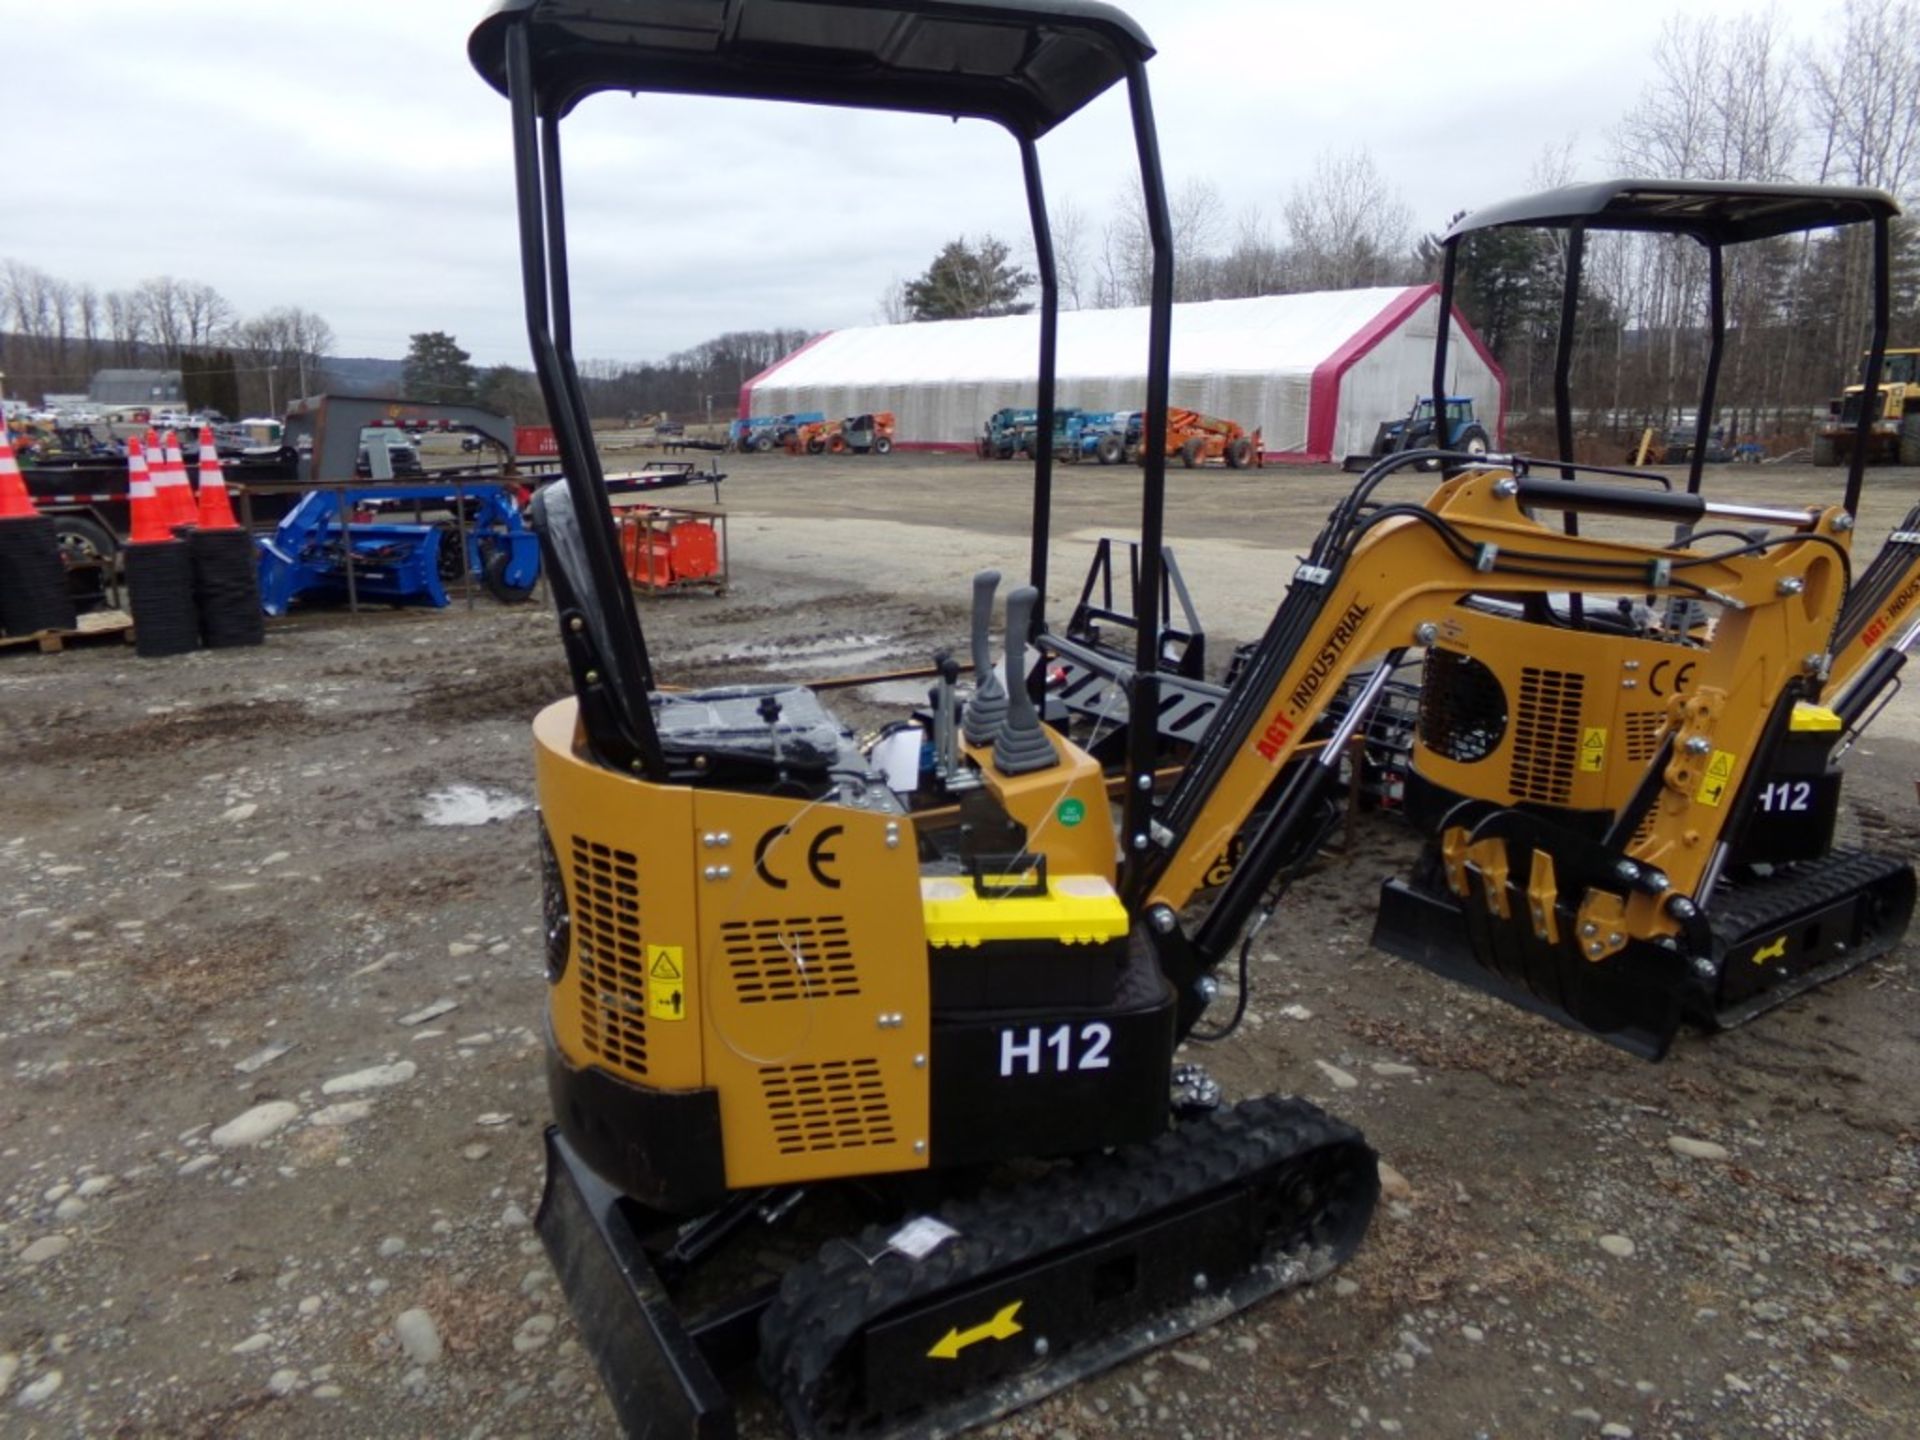 New, AGT, Industrial H12 Mini Excavator, Grader Blade, Stationary Thumb, Briggs & Stratton Gas - Image 3 of 6